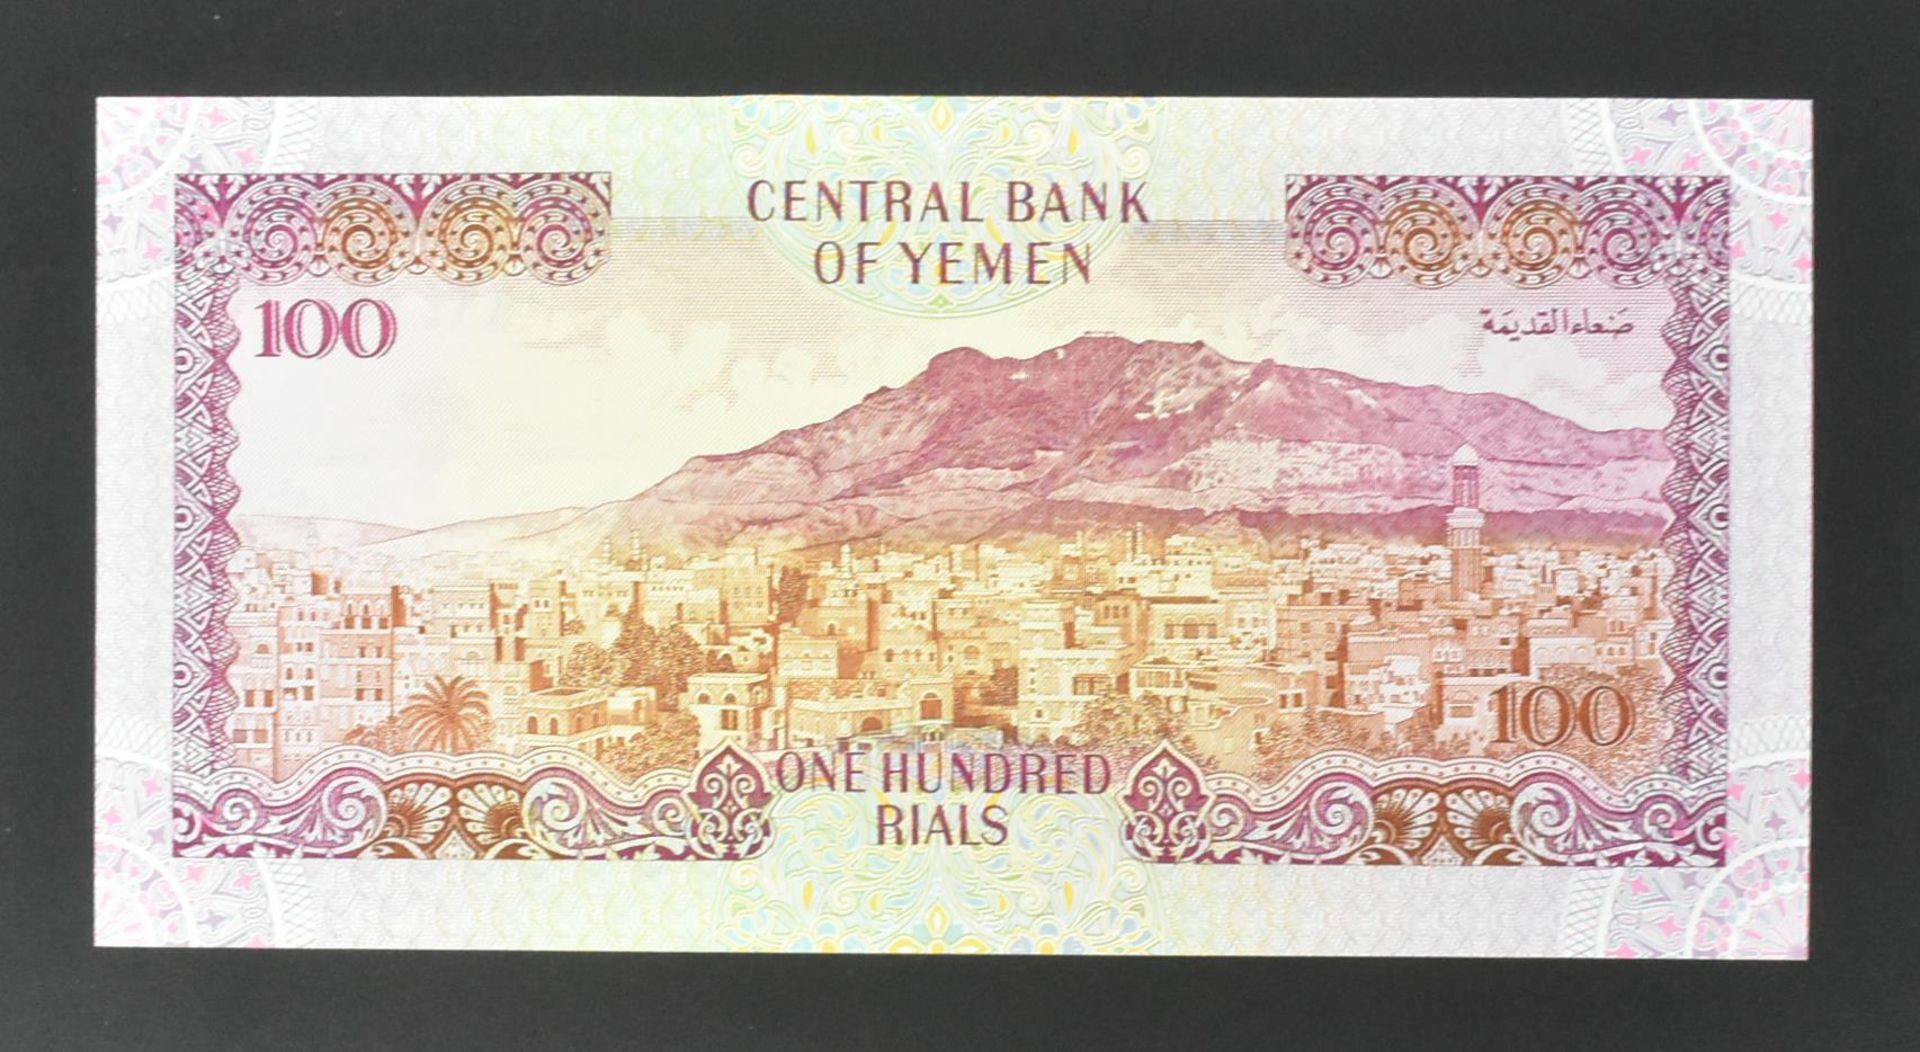 COLLECTION OF INTERNATIONAL UNCIRCULATED BANK NOTES - Image 30 of 36